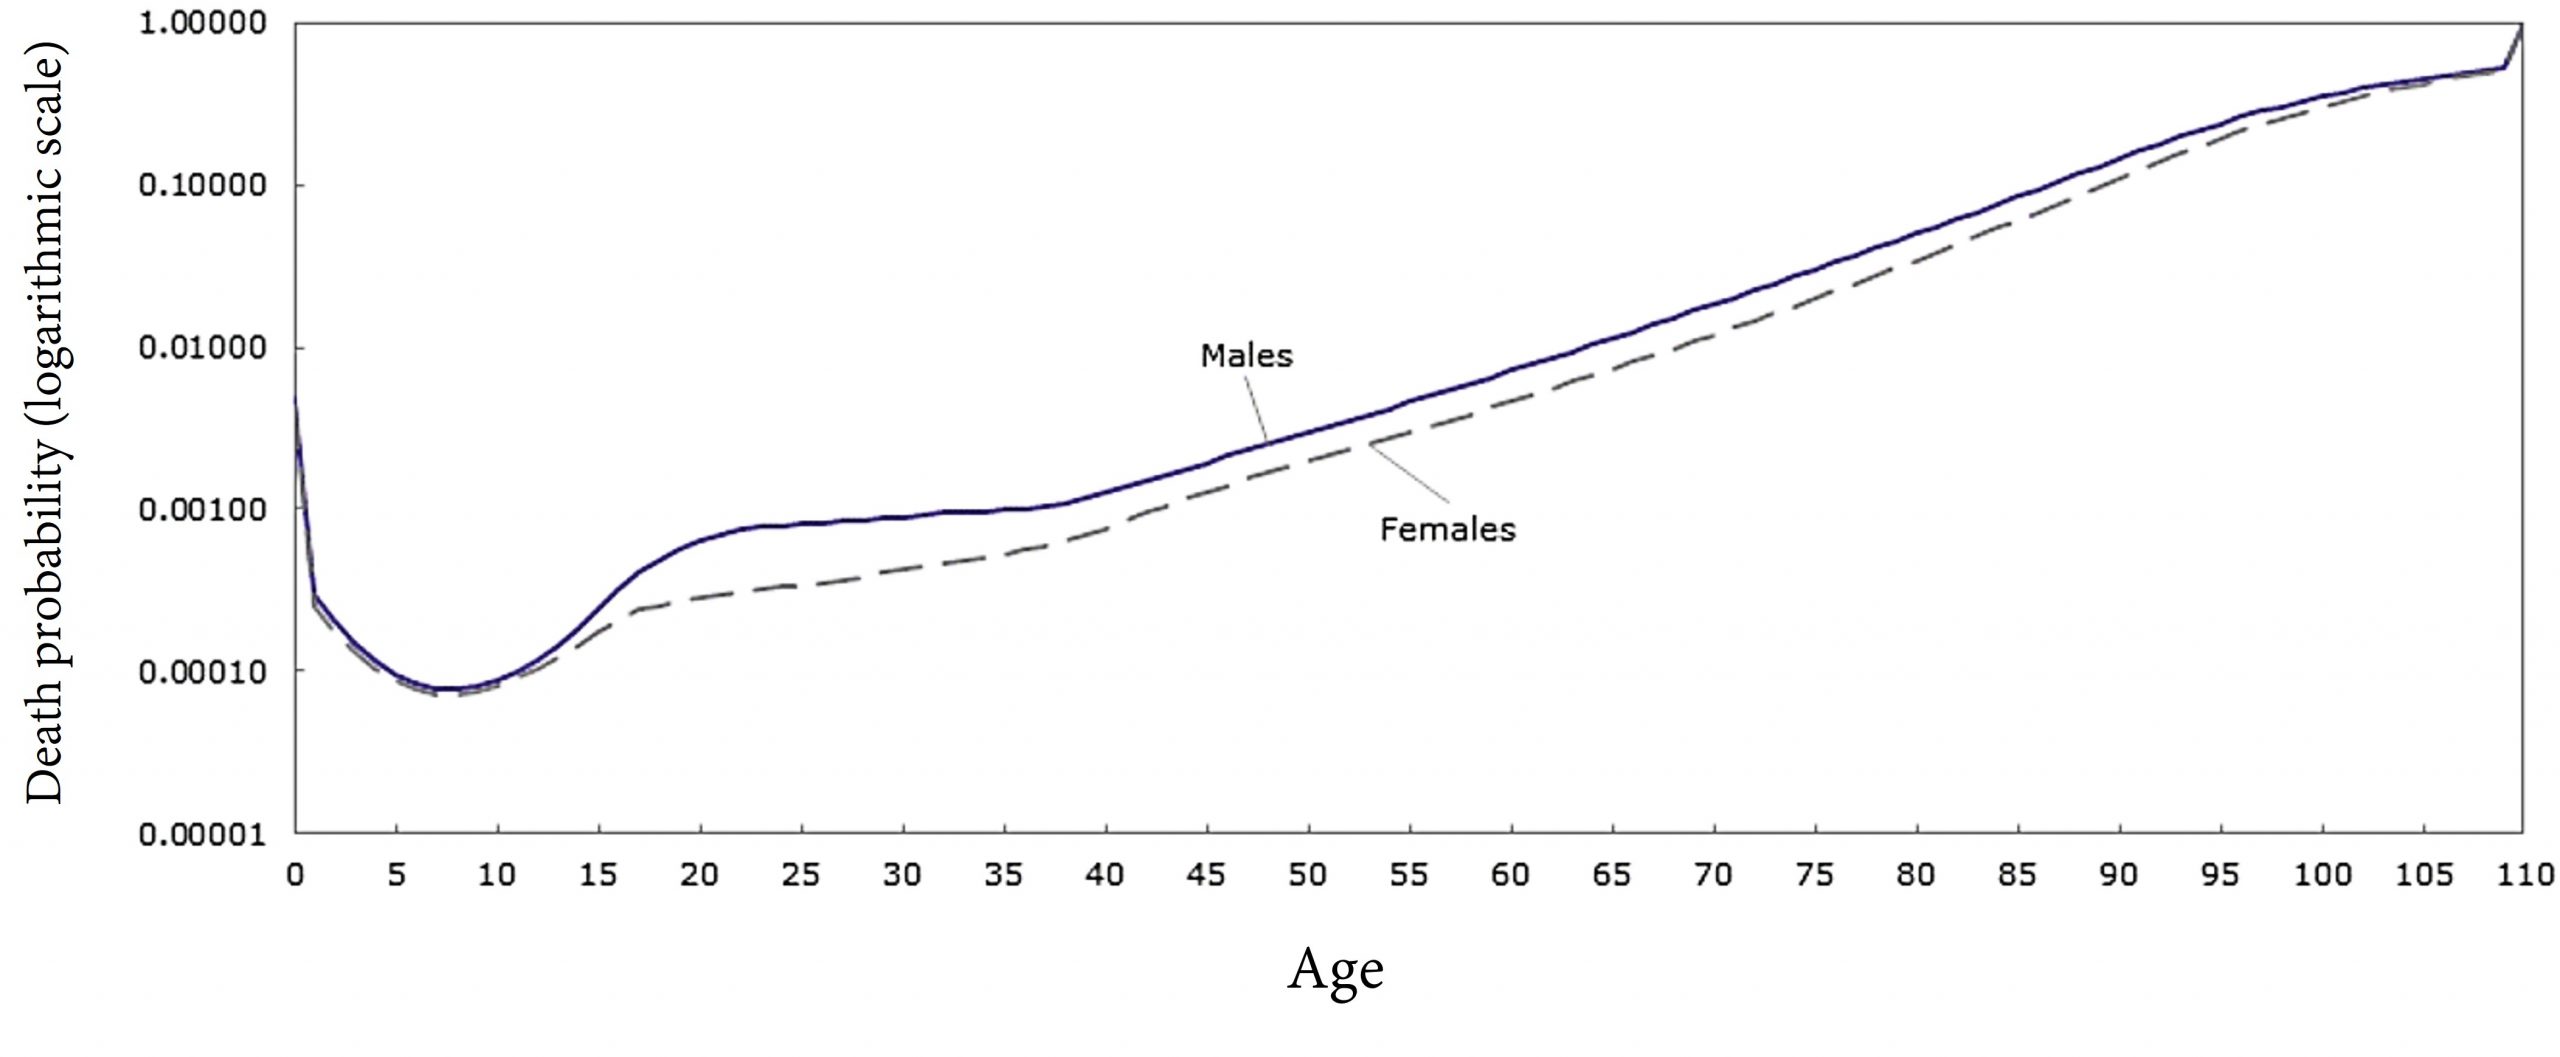 This figure shows that, in the years 2014-2016, the probability of dying in Canada fell rapidly after birth, reaching a low for boys and girls at about age 7. The probability of dying increased at that point and didn't reach the dangers of infancy again until men and women were in their early fifties. Women's probability of dying increased at a lower rate once they were out of their teen years. Men's probability of dying didn't settle down until their mid-twenties. The probability of death was higher for male infants and children than for female infants and children, but not by a lot. After about age 12, the probability of dying was more noticeably higher for boys than for girls and remained higher. The difference in probabilities of dying for men and women was highest during their early twenties.